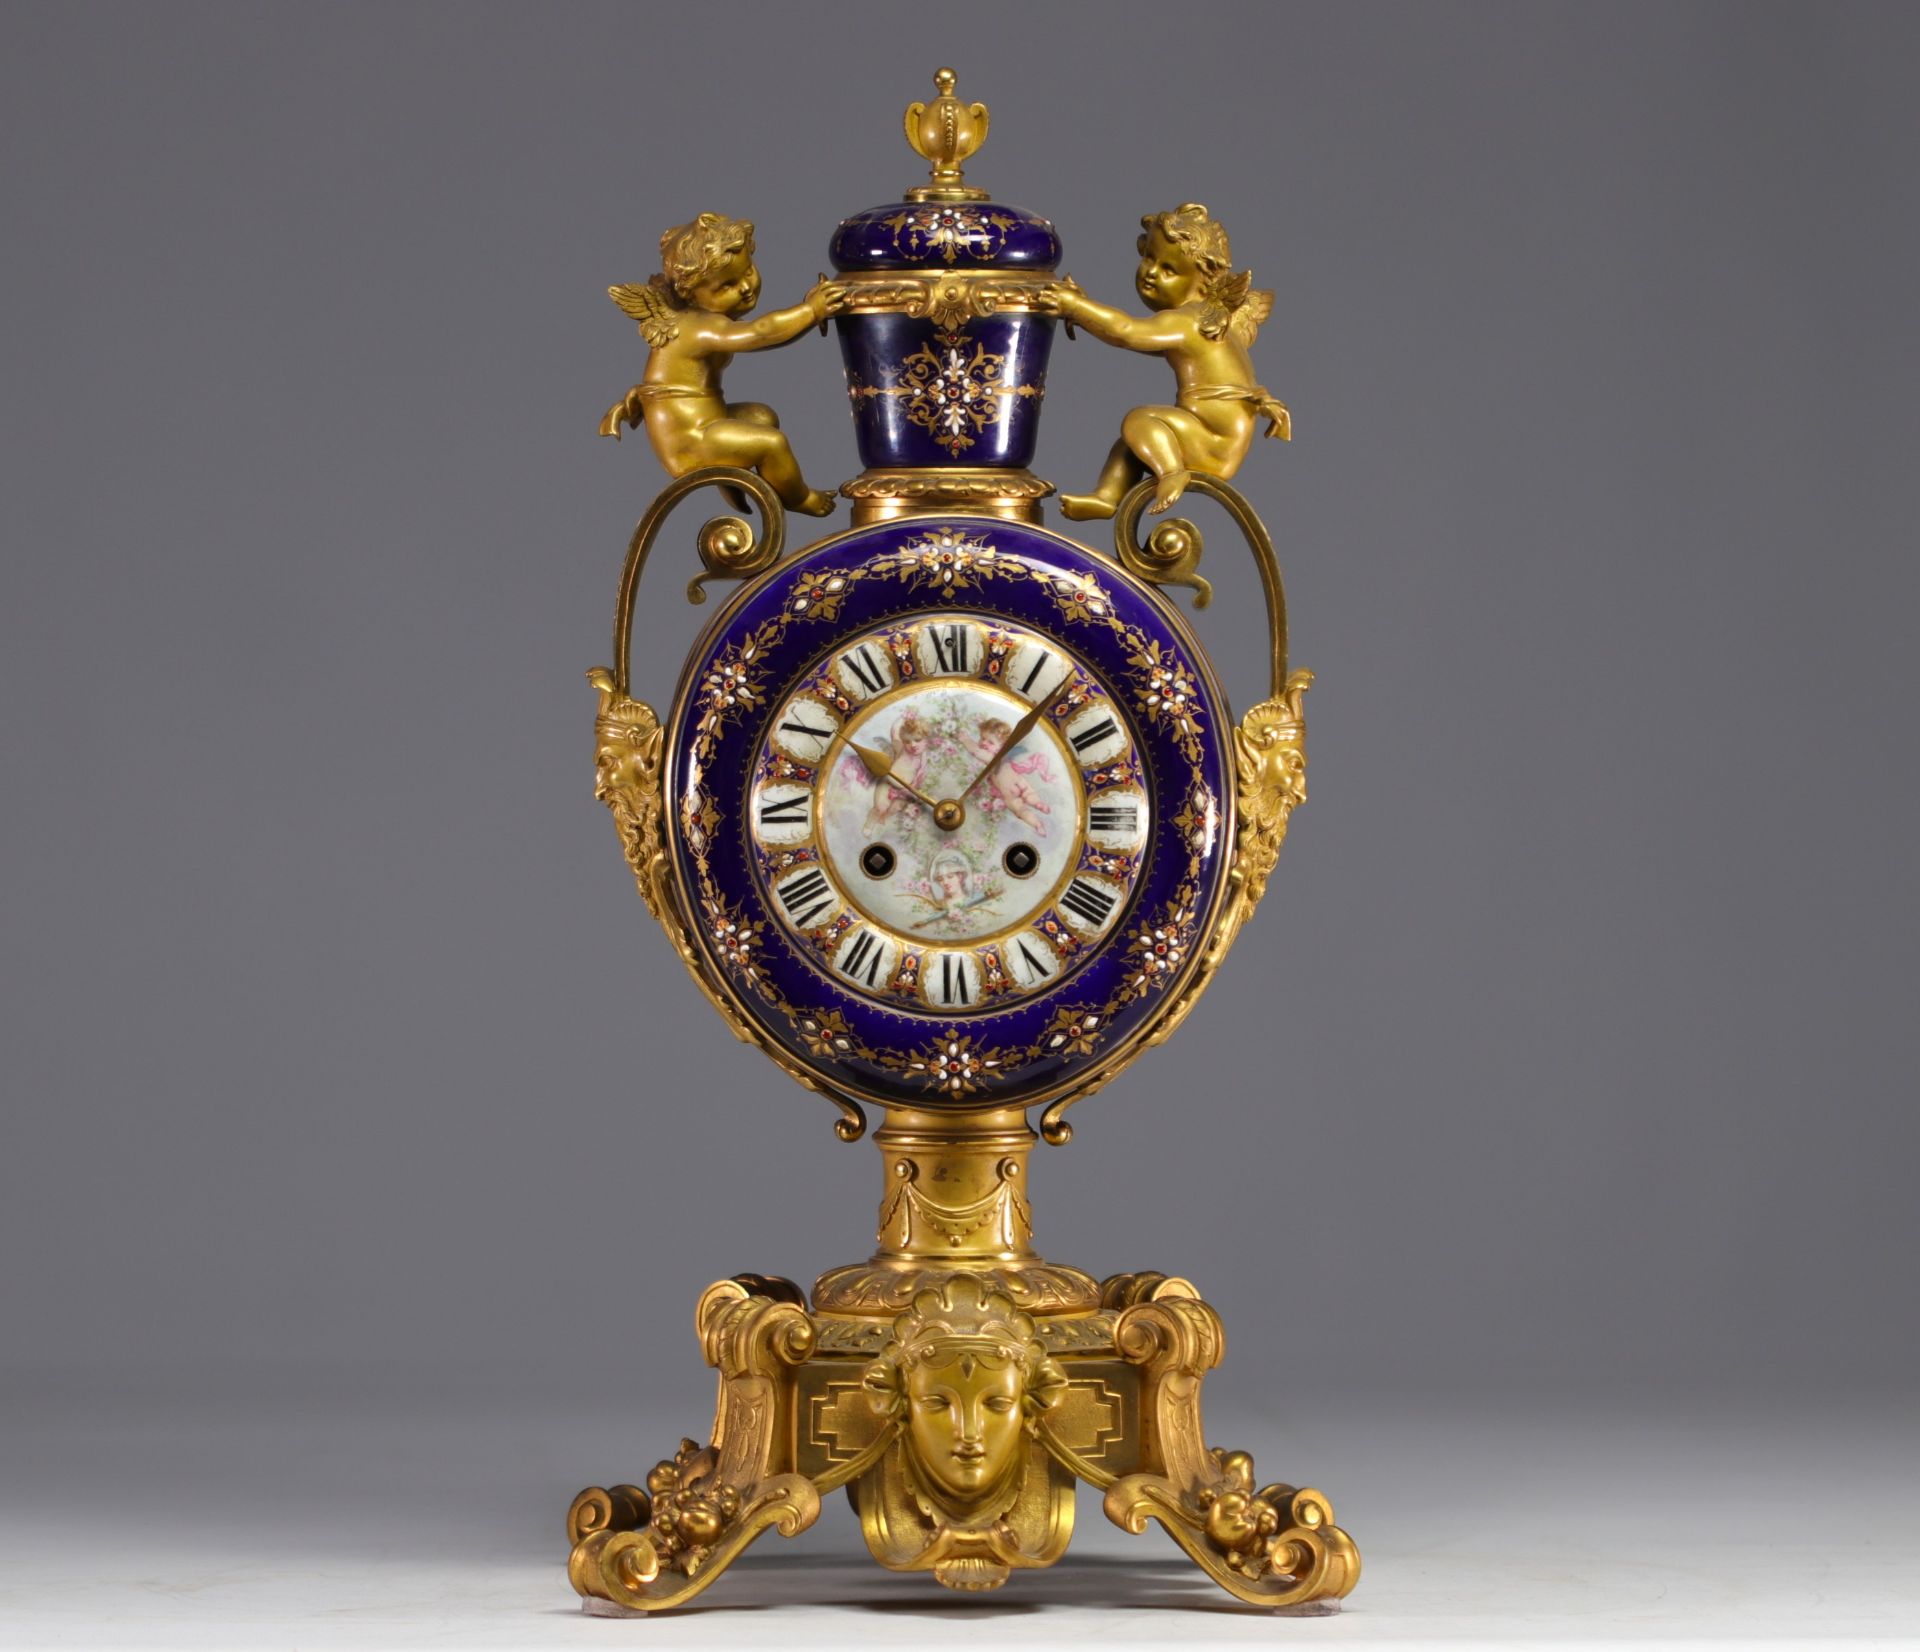 A rare Sevres porcelain and gilt bronze clock decorated with cherubs.